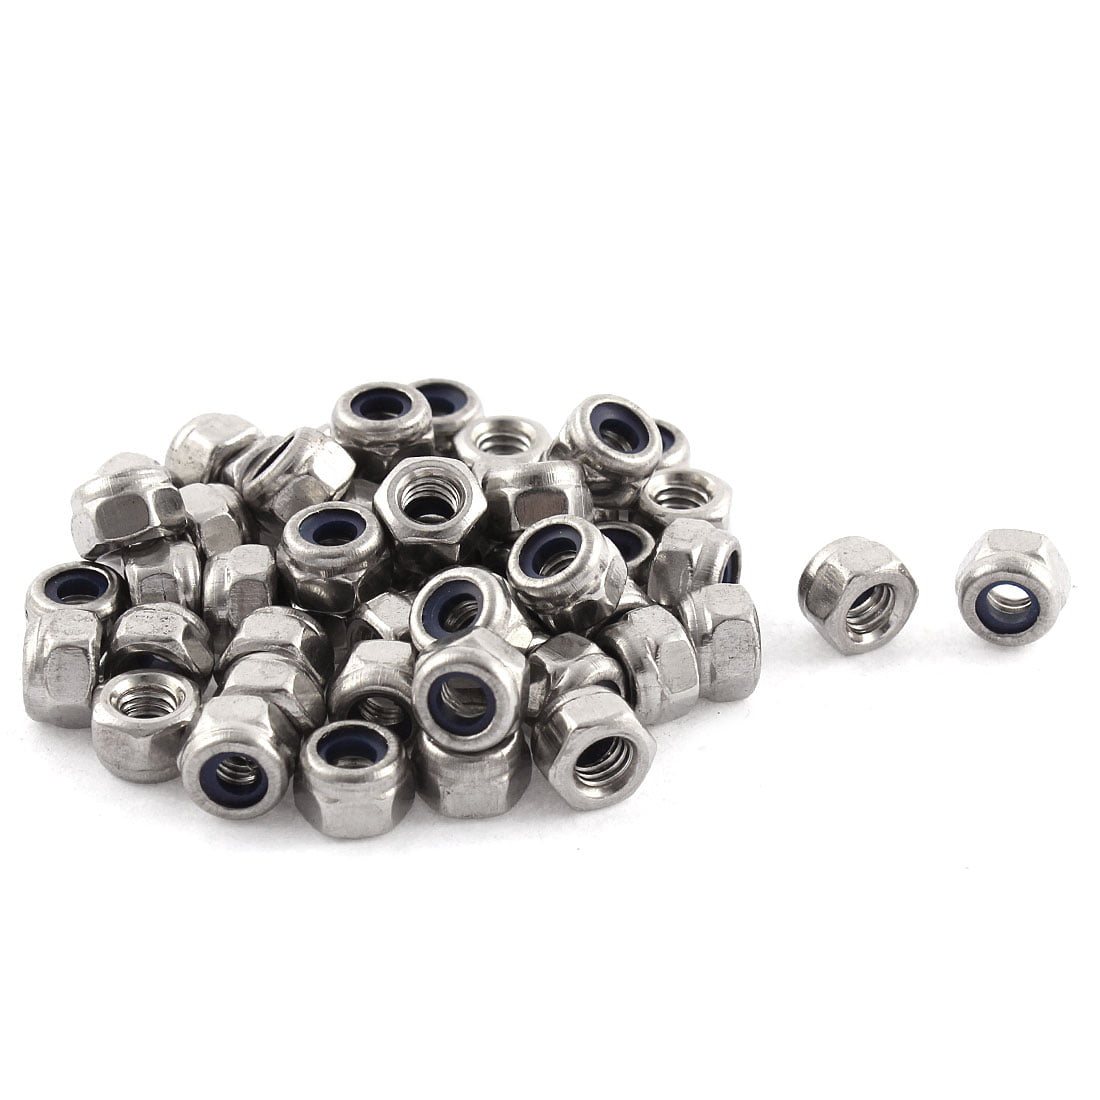 NYLOC NYLON INSERT LOCK NUTS M3 3mm  A4 STAINLESS STEEL PACK 20 30 